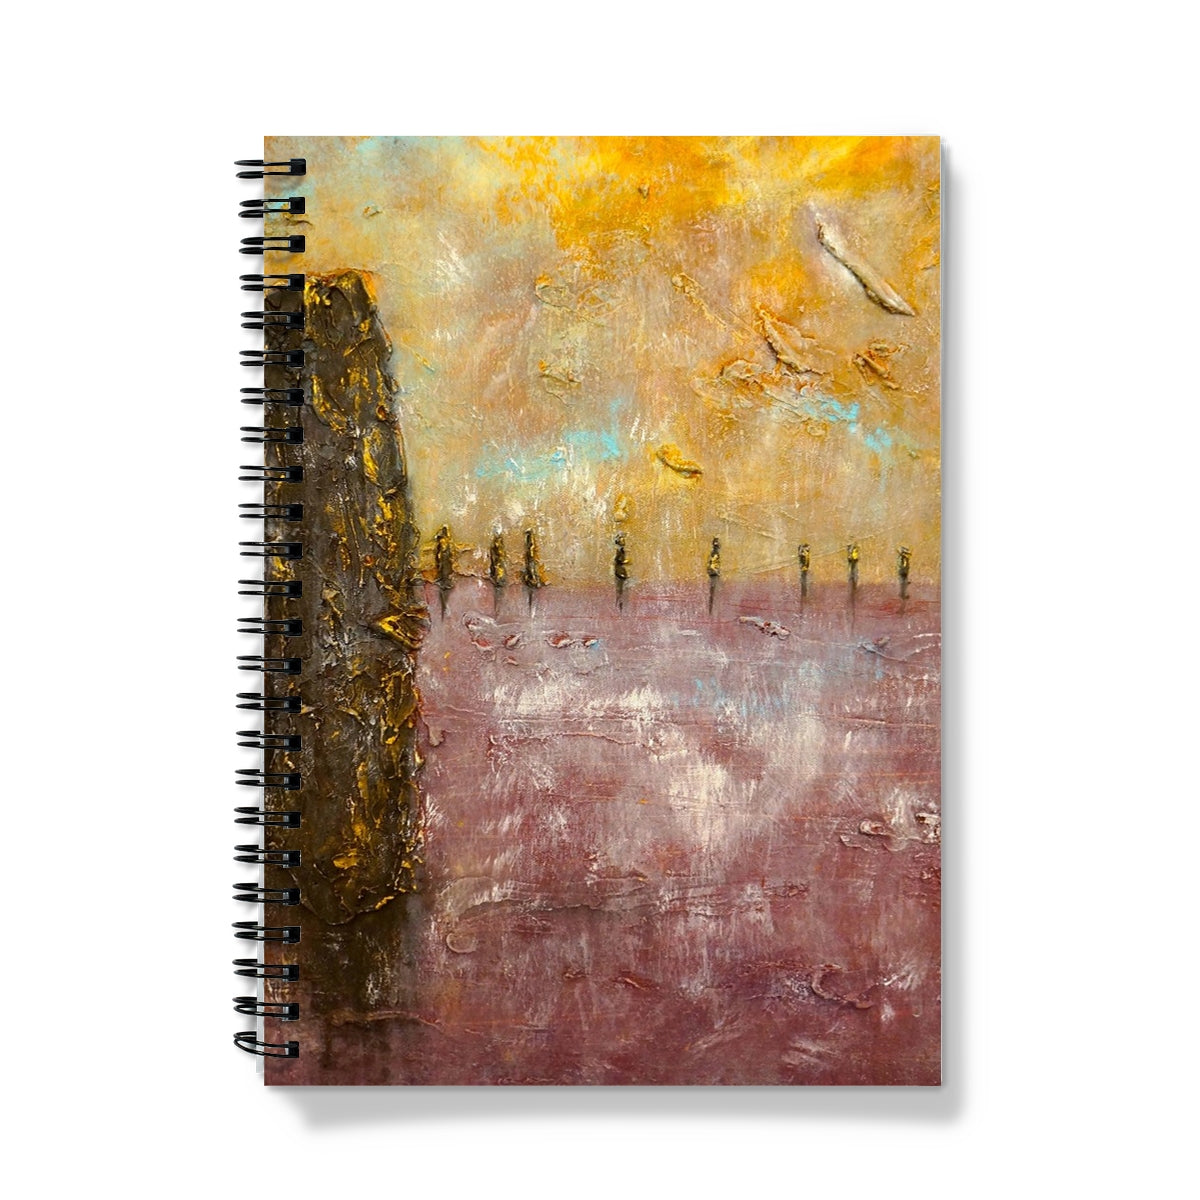 Bordgar Mist Orkney Art Gifts Notebook-Journals & Notebooks-Orkney Art Gallery-A4-Graph-Paintings, Prints, Homeware, Art Gifts From Scotland By Scottish Artist Kevin Hunter